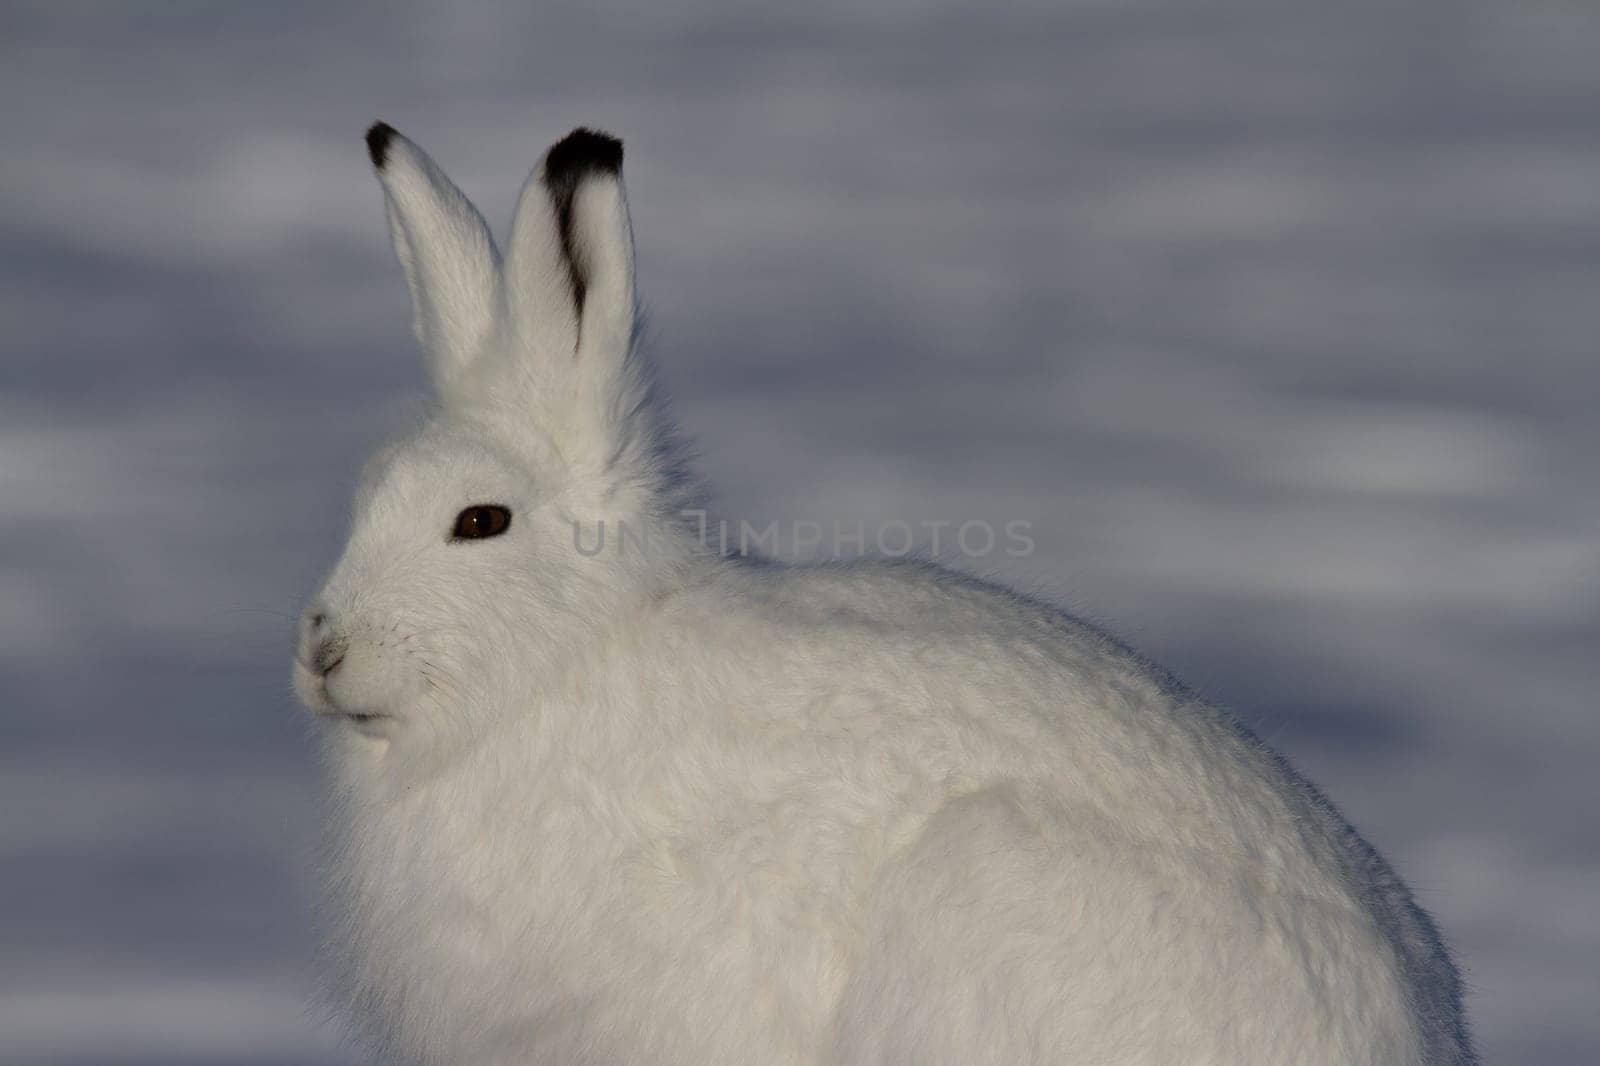 Arctic hare in winter coat staring forward with snow in the background by Granchinho